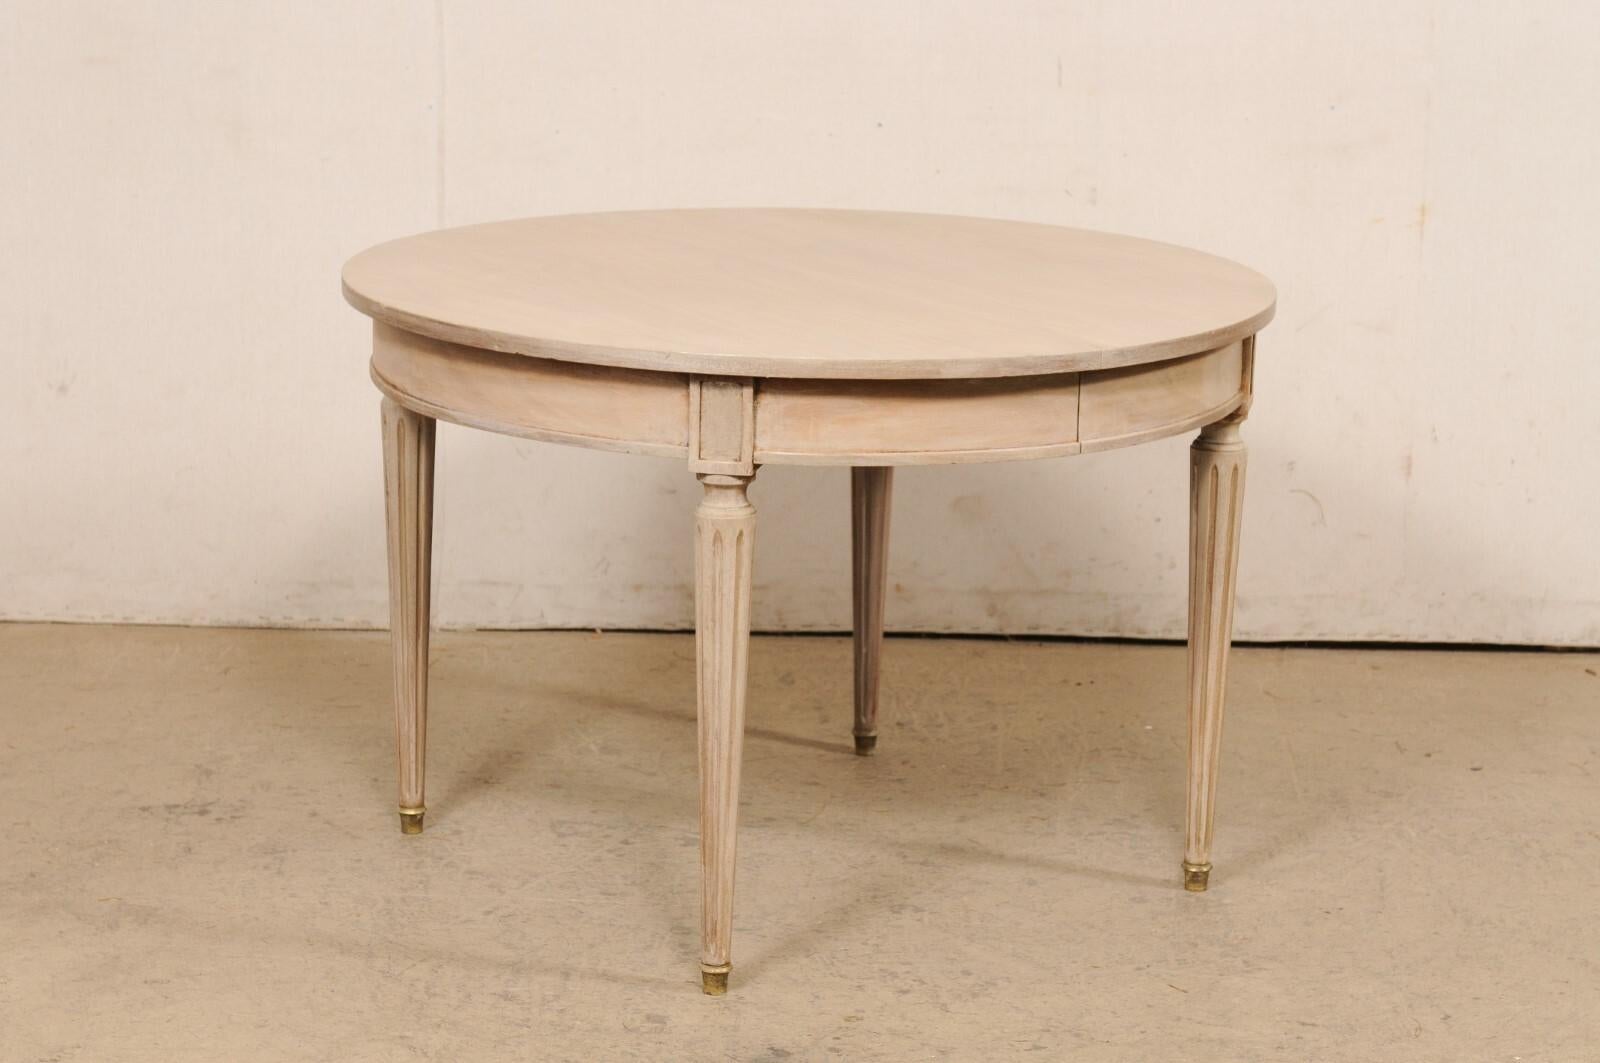 French Round Painted Wood Table w/Fluted Legs & Brass Feet, 3.5 Ft Diameter For Sale 2